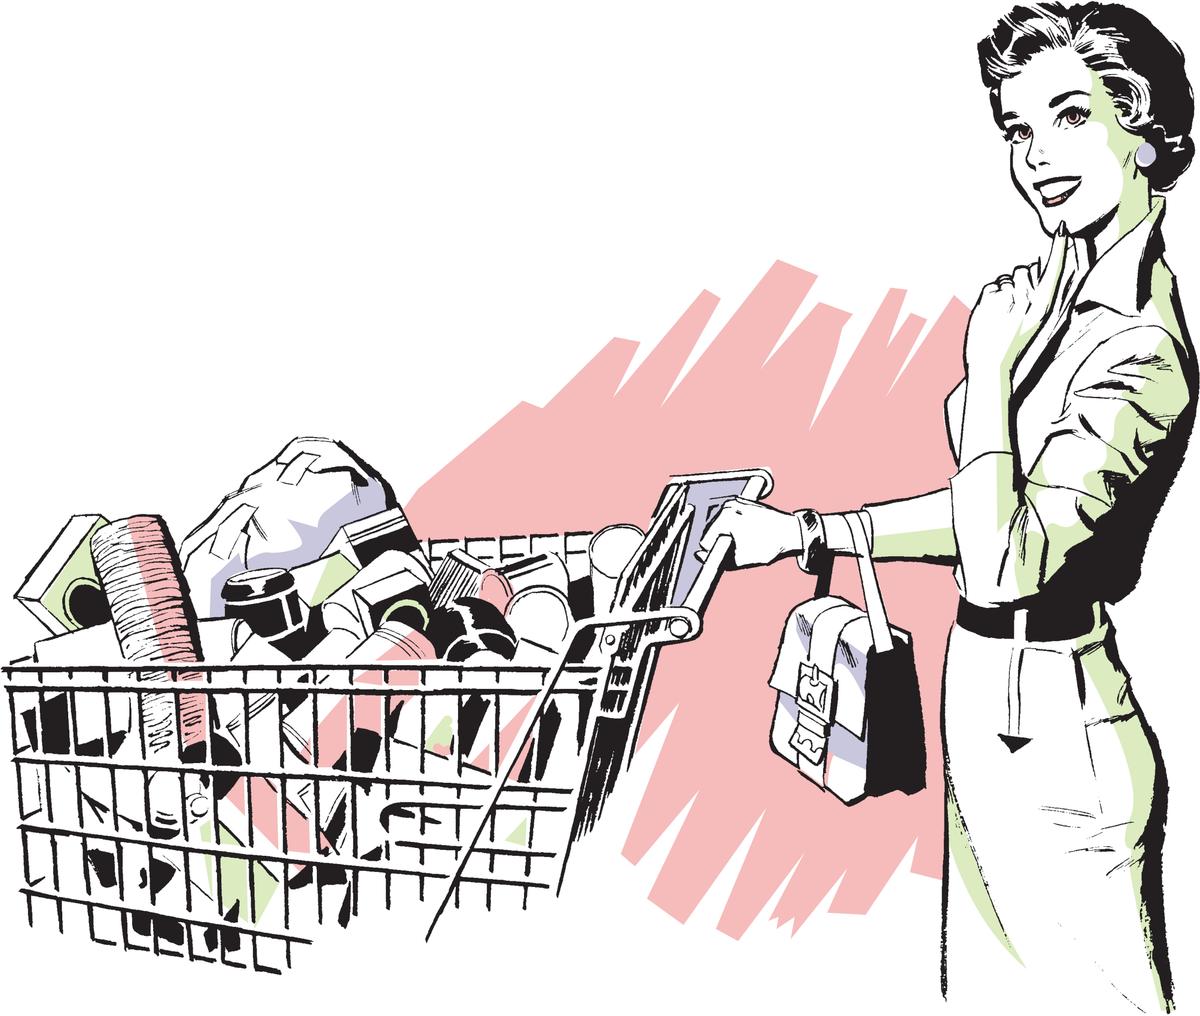 How to Be a Well-Behaved Shopper